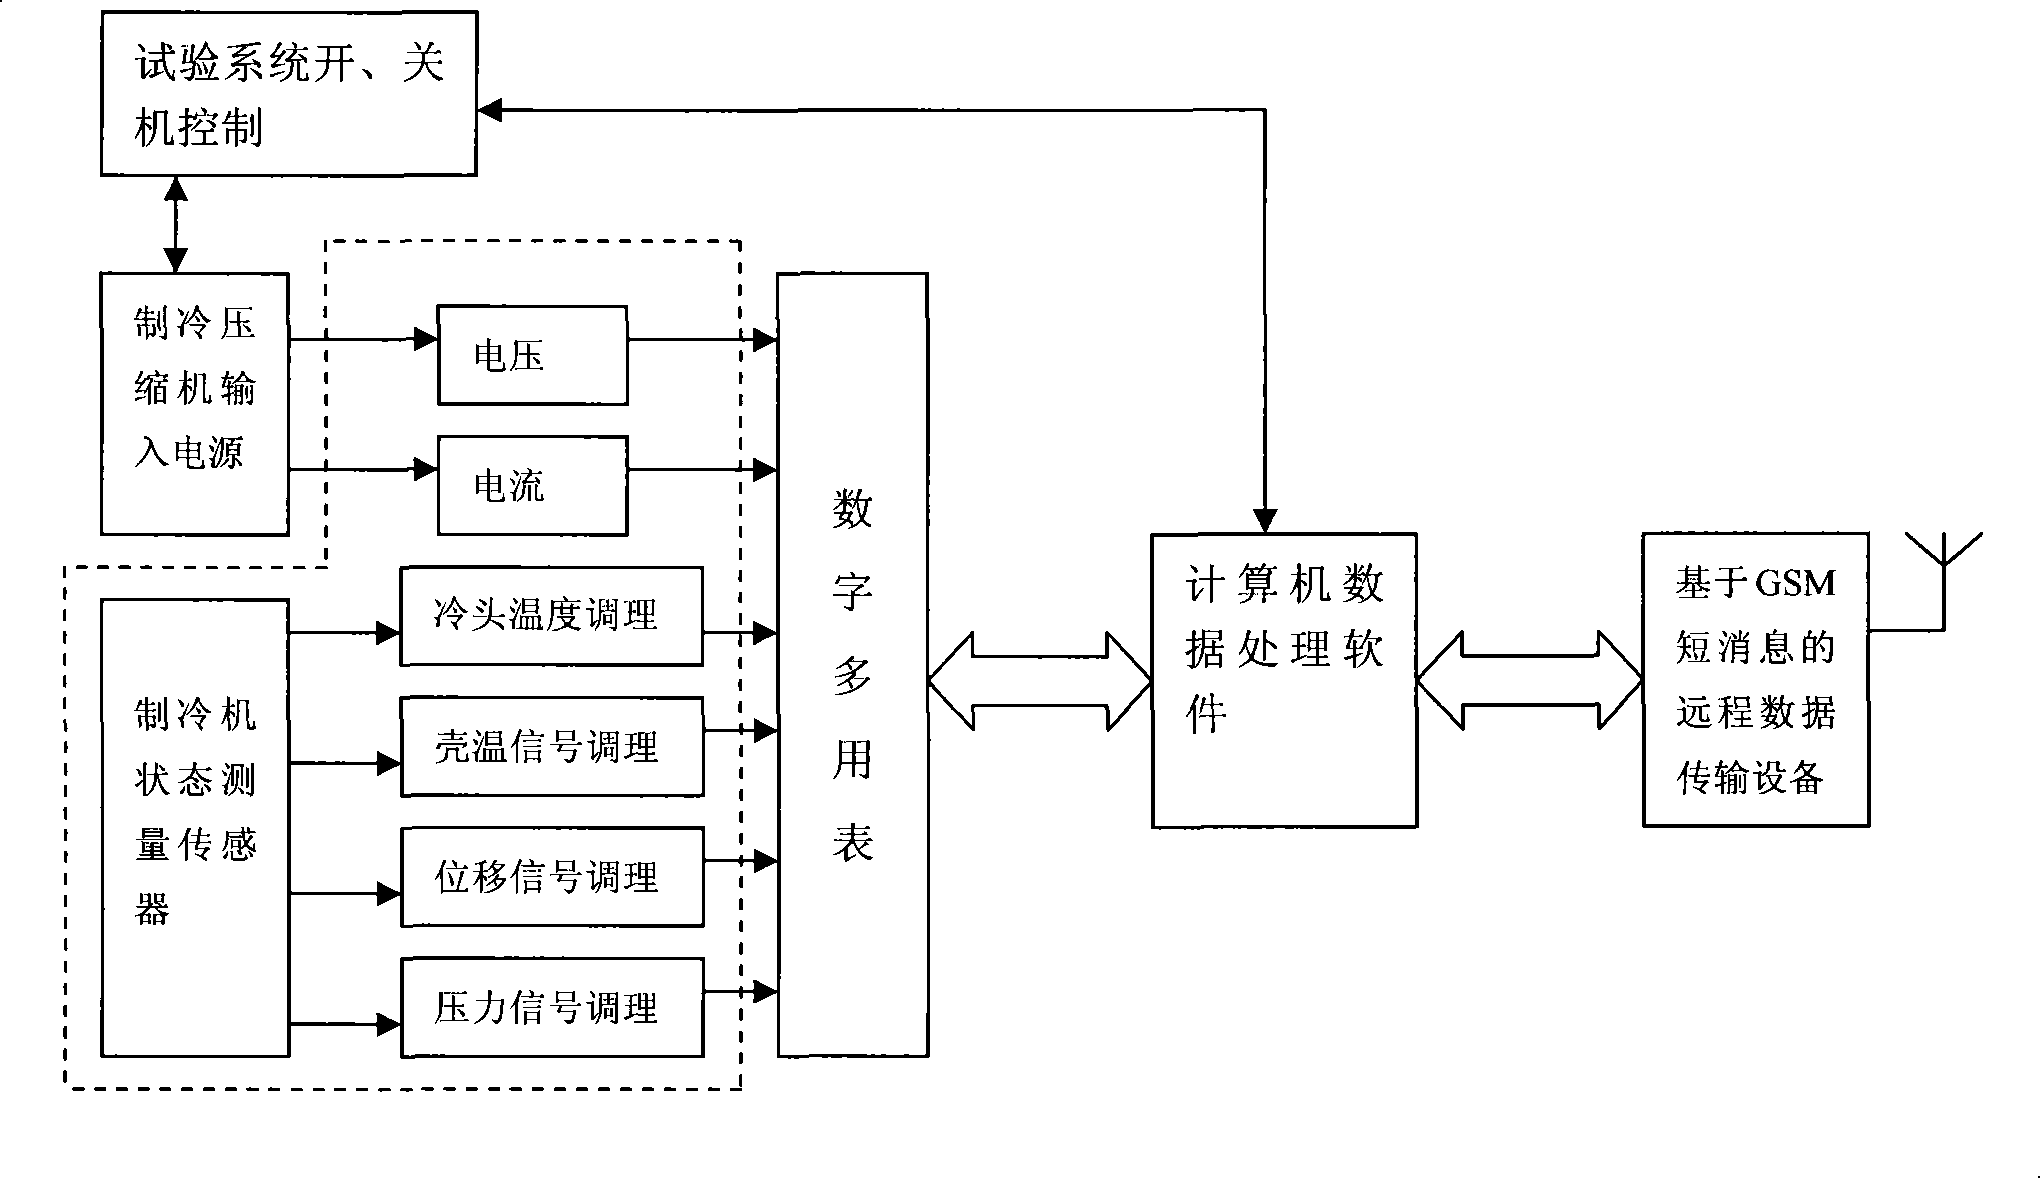 System for processing star load equipment life experimental data